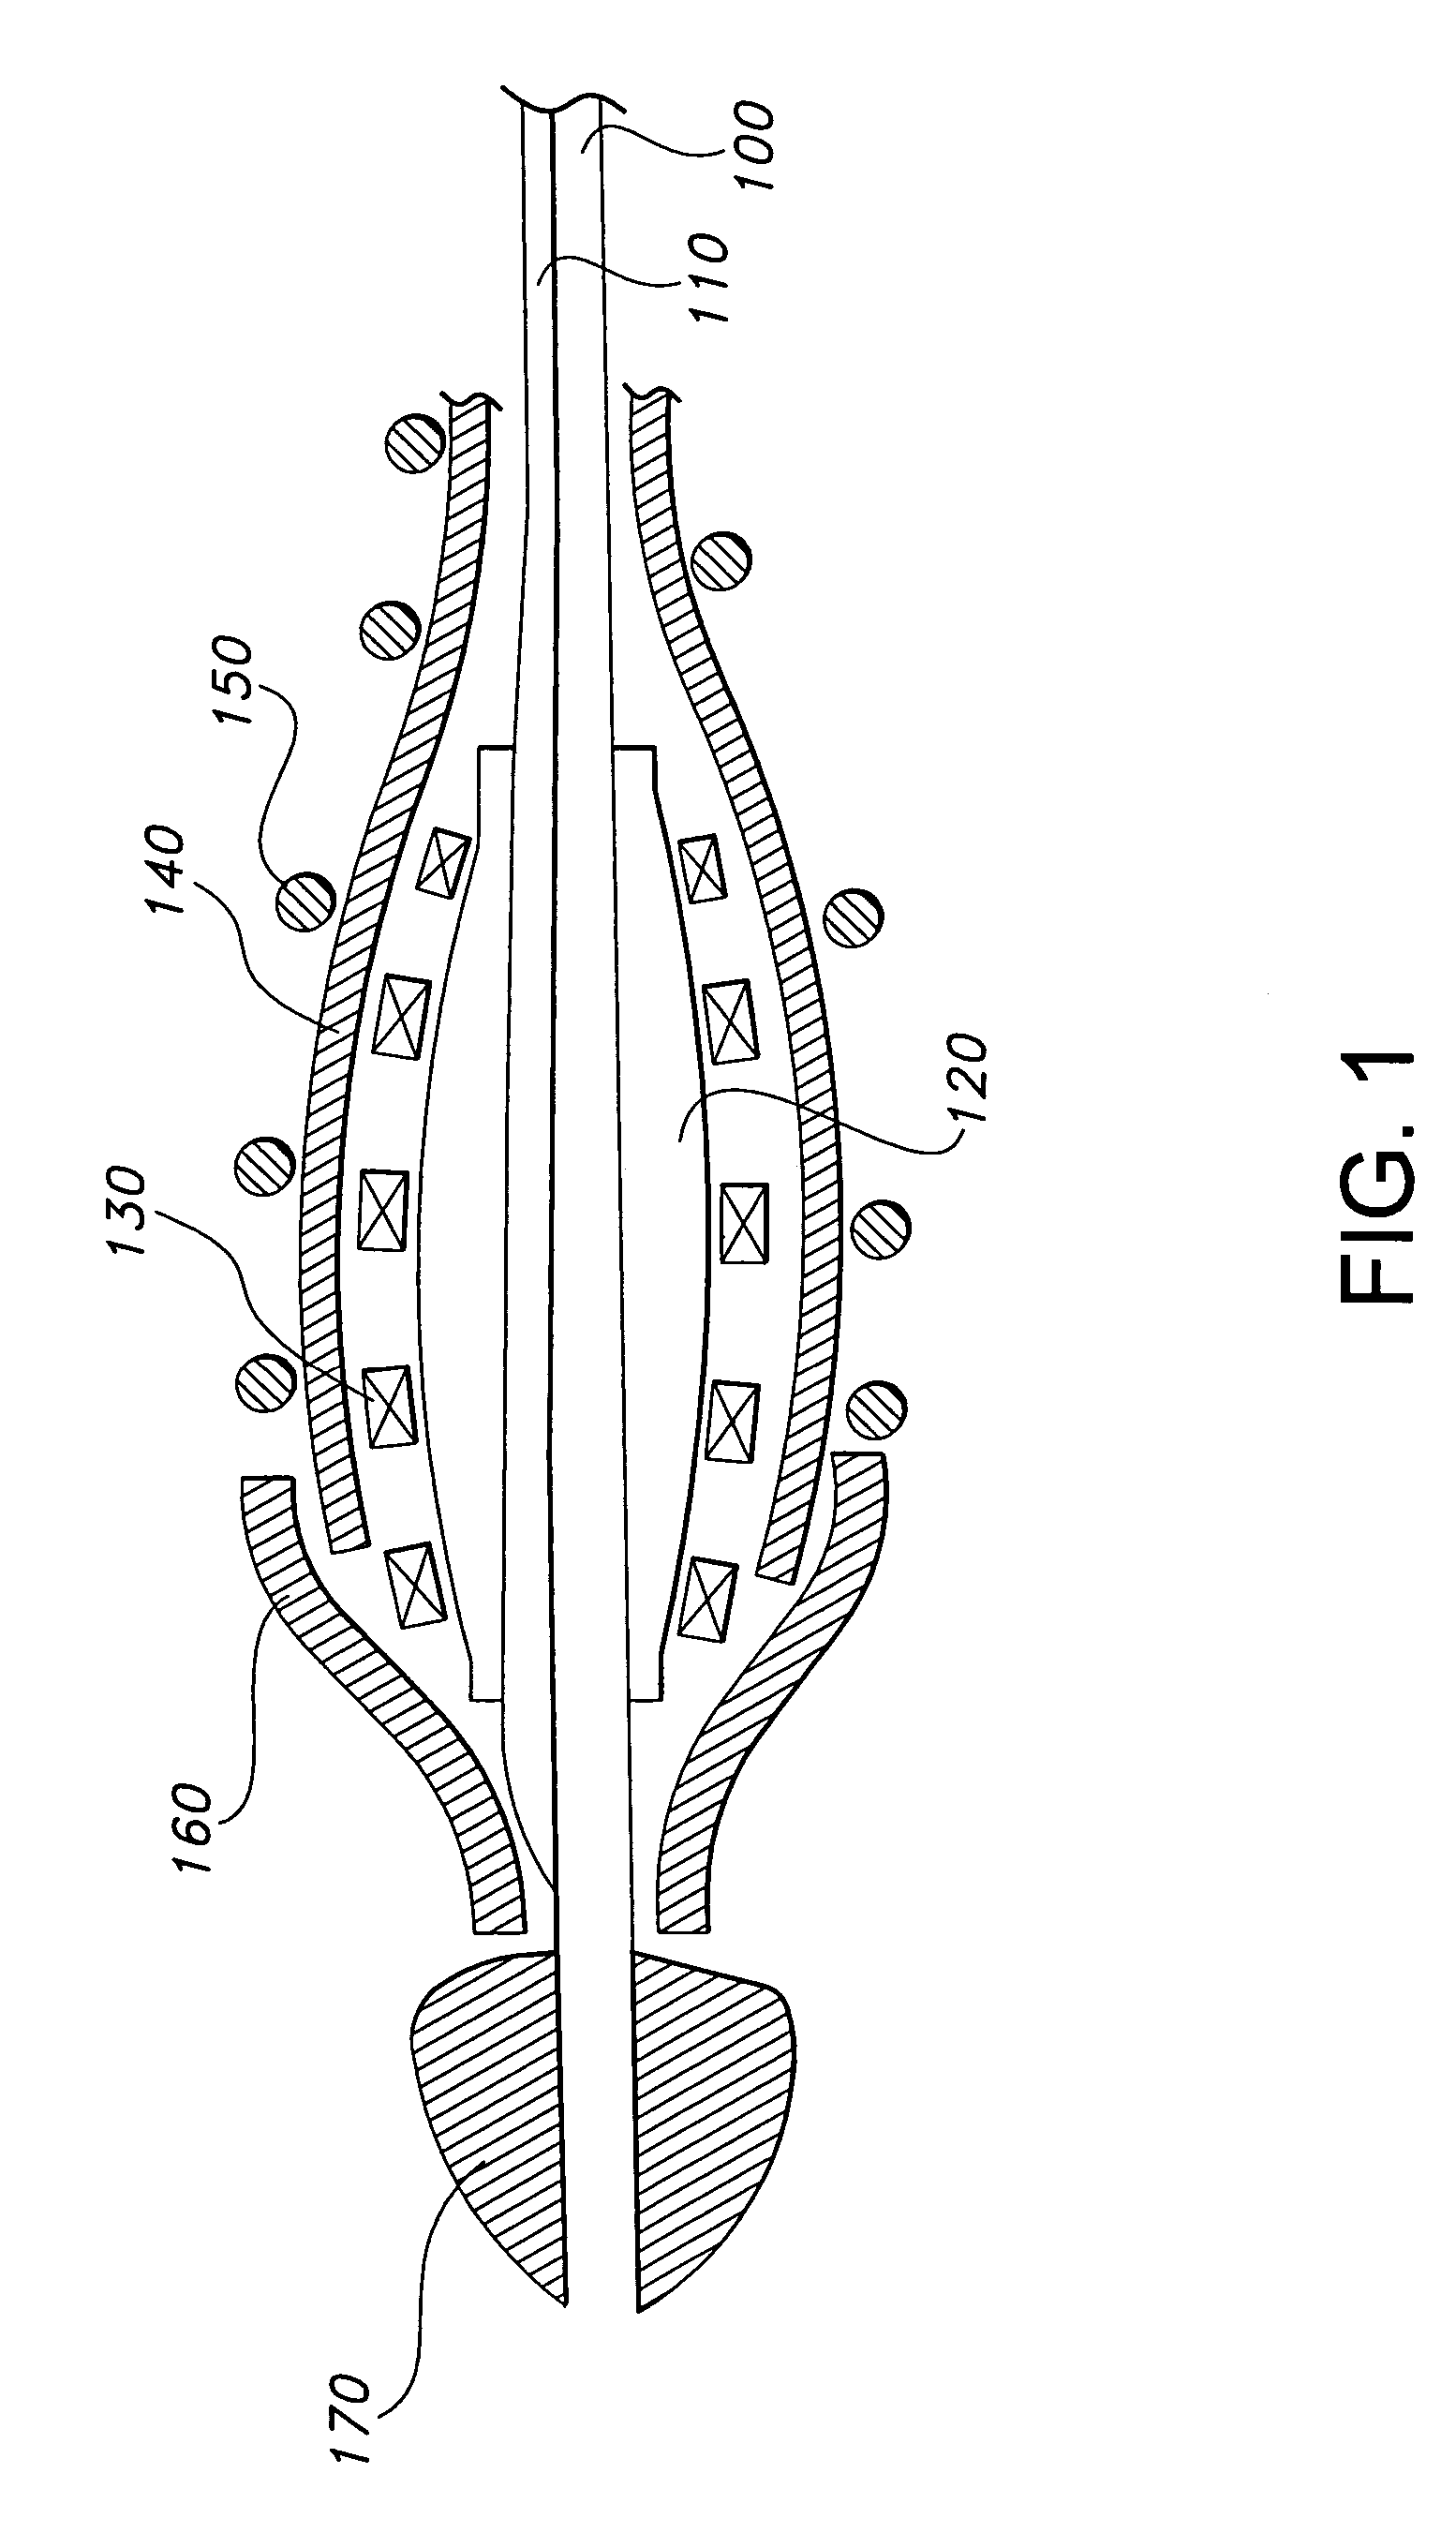 Method for inserting a prosthesis